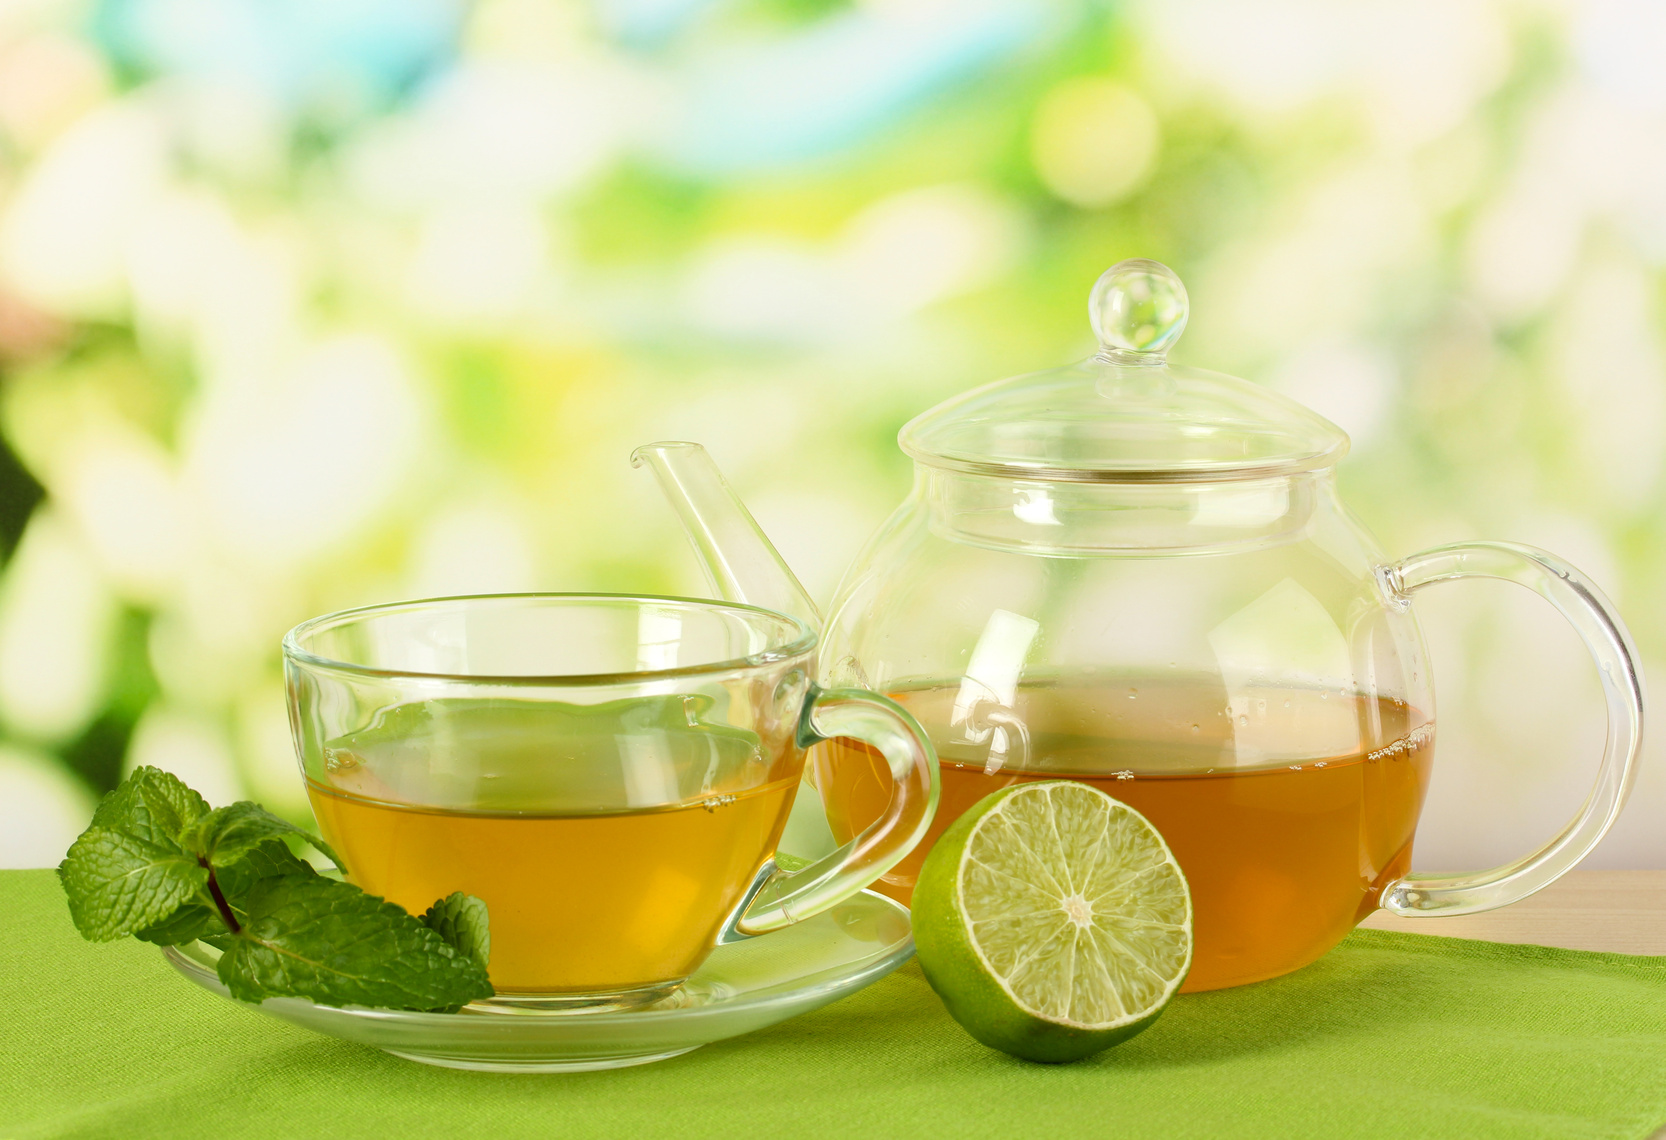 Cup of tea with mint and lime on table on bright background